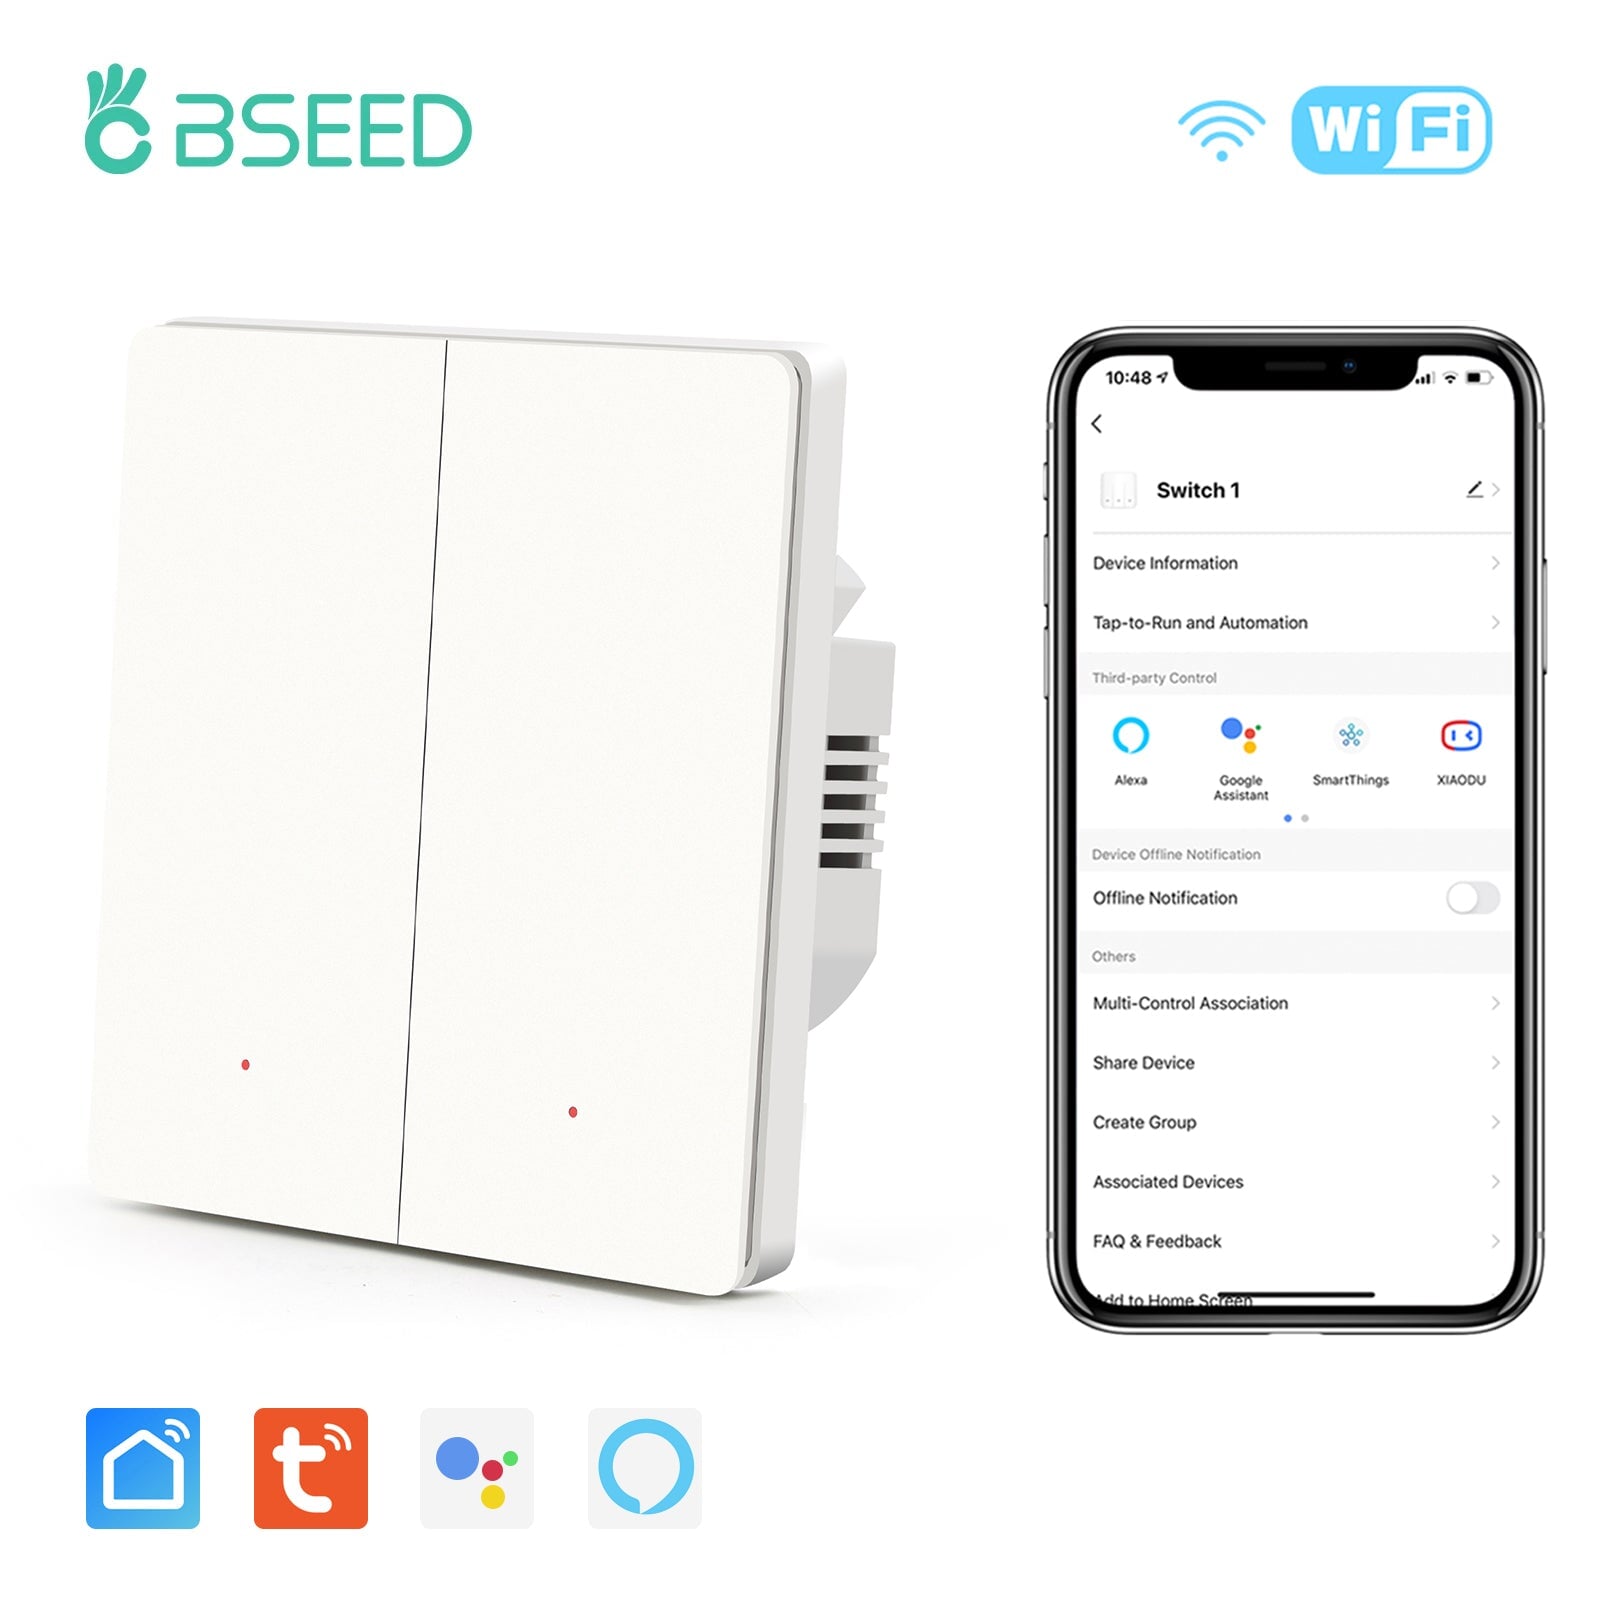 BSEED WiFi Automatic Rebound Smart Wall Light Switches Neutral Switch Bseedswitch White 2gang 